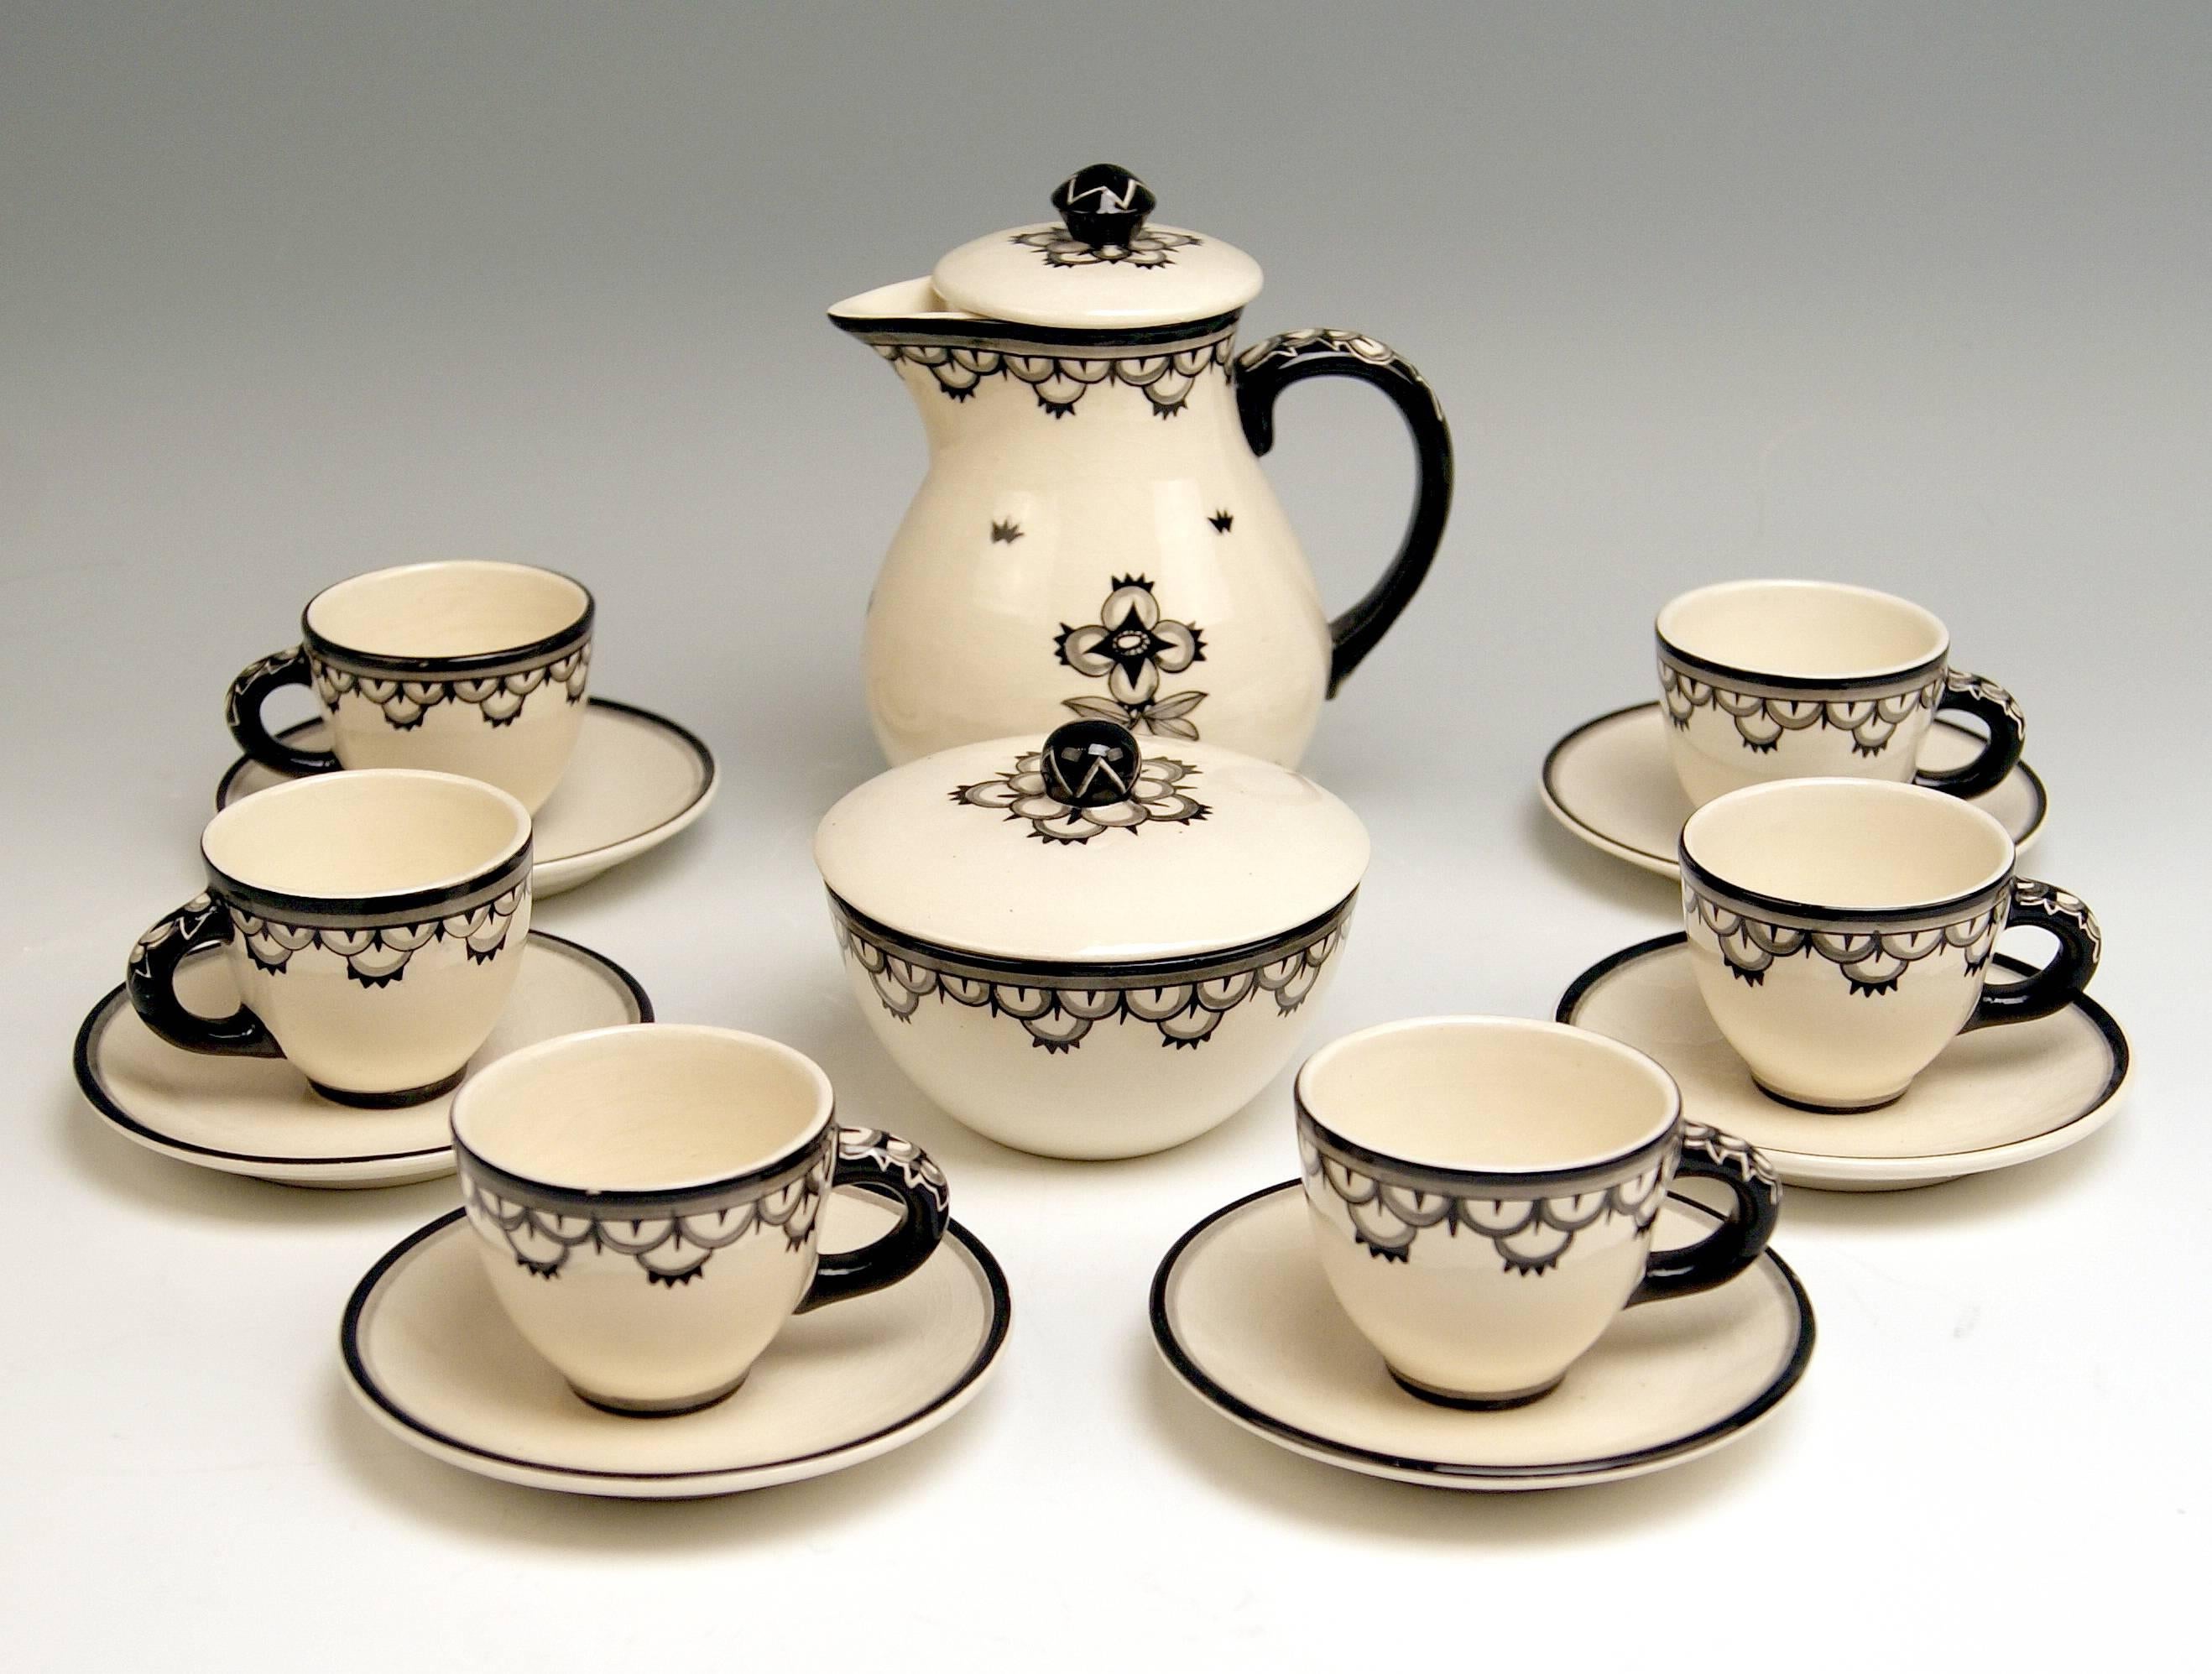 Most elegant mocha set for six persons
made of cream white ceramics / glazed and partially black painted / very interesting stylized monochrome pattern:
It is strongly influenced by designs created by Dagobert Peche ! 

We're presenting here: